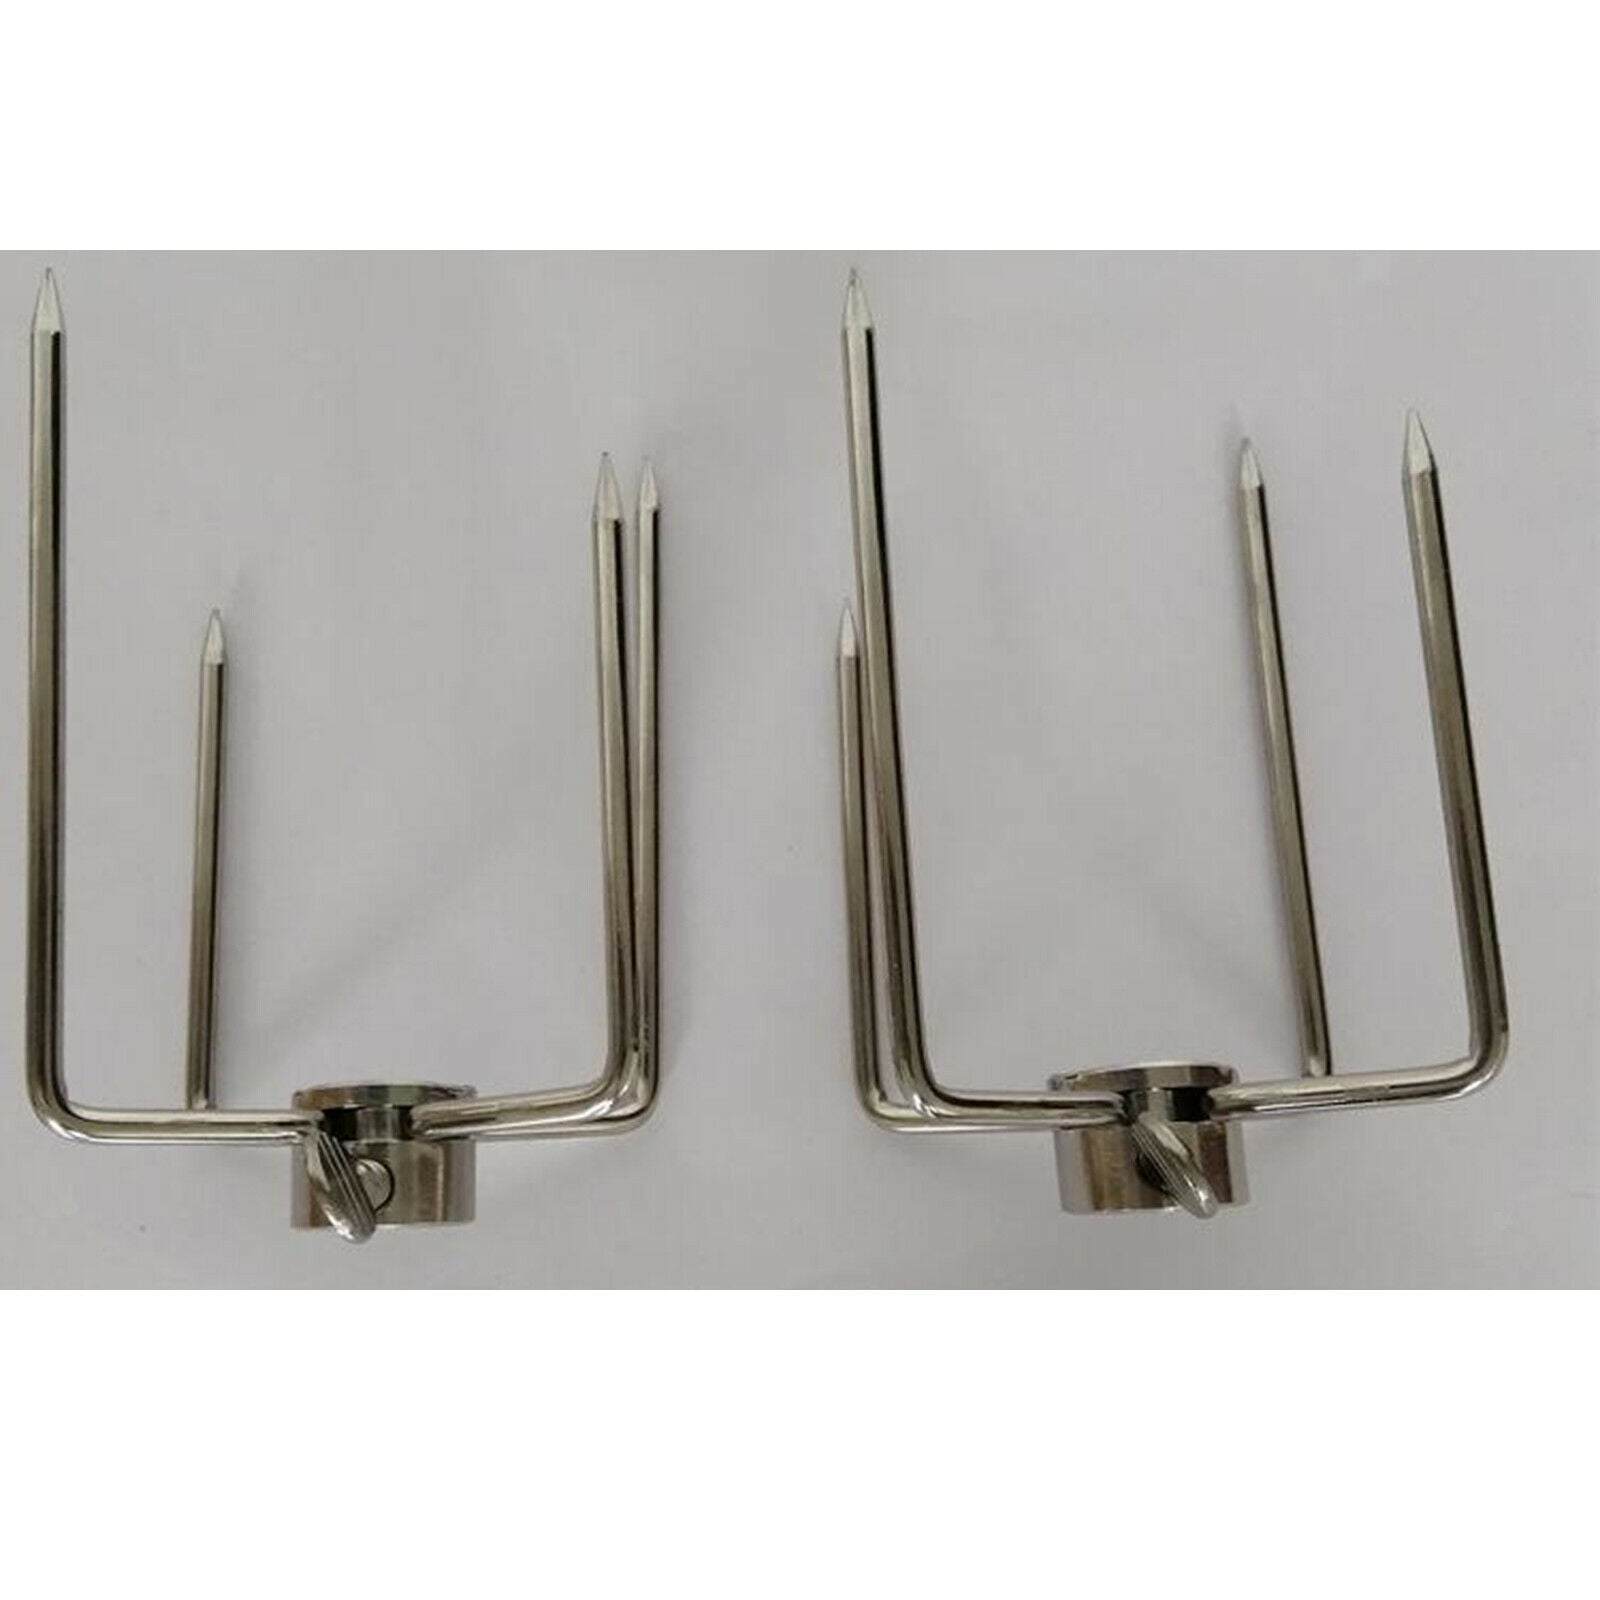 1 Pair Stainless Steel Rotisserie BBQ Spit Fork Chicken Beef Barbecue Tool